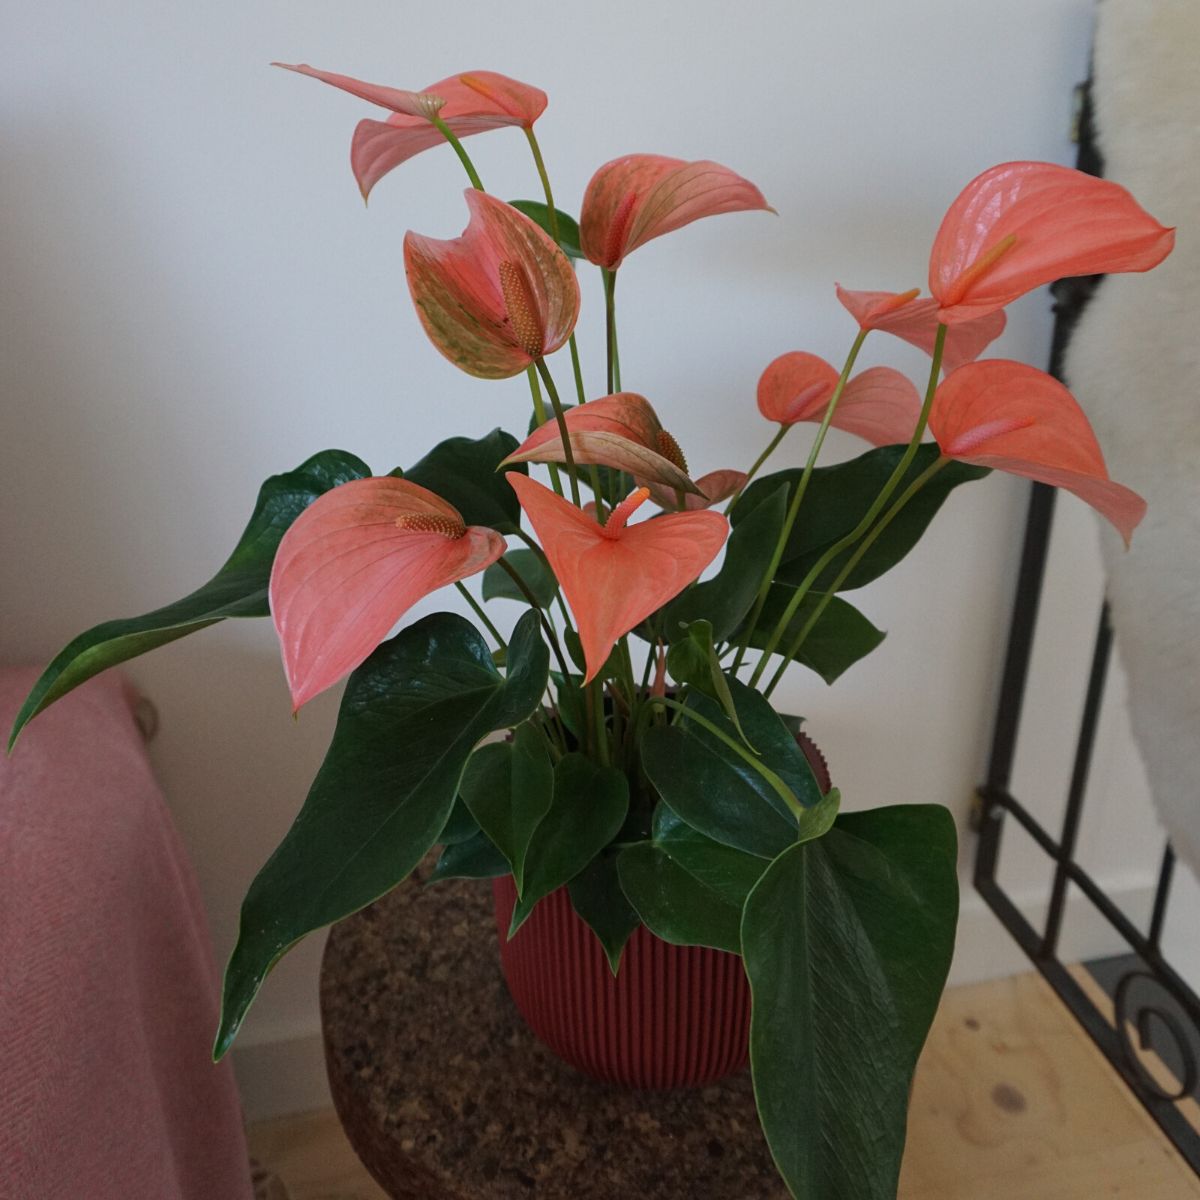 Information on the origin of anthuriums